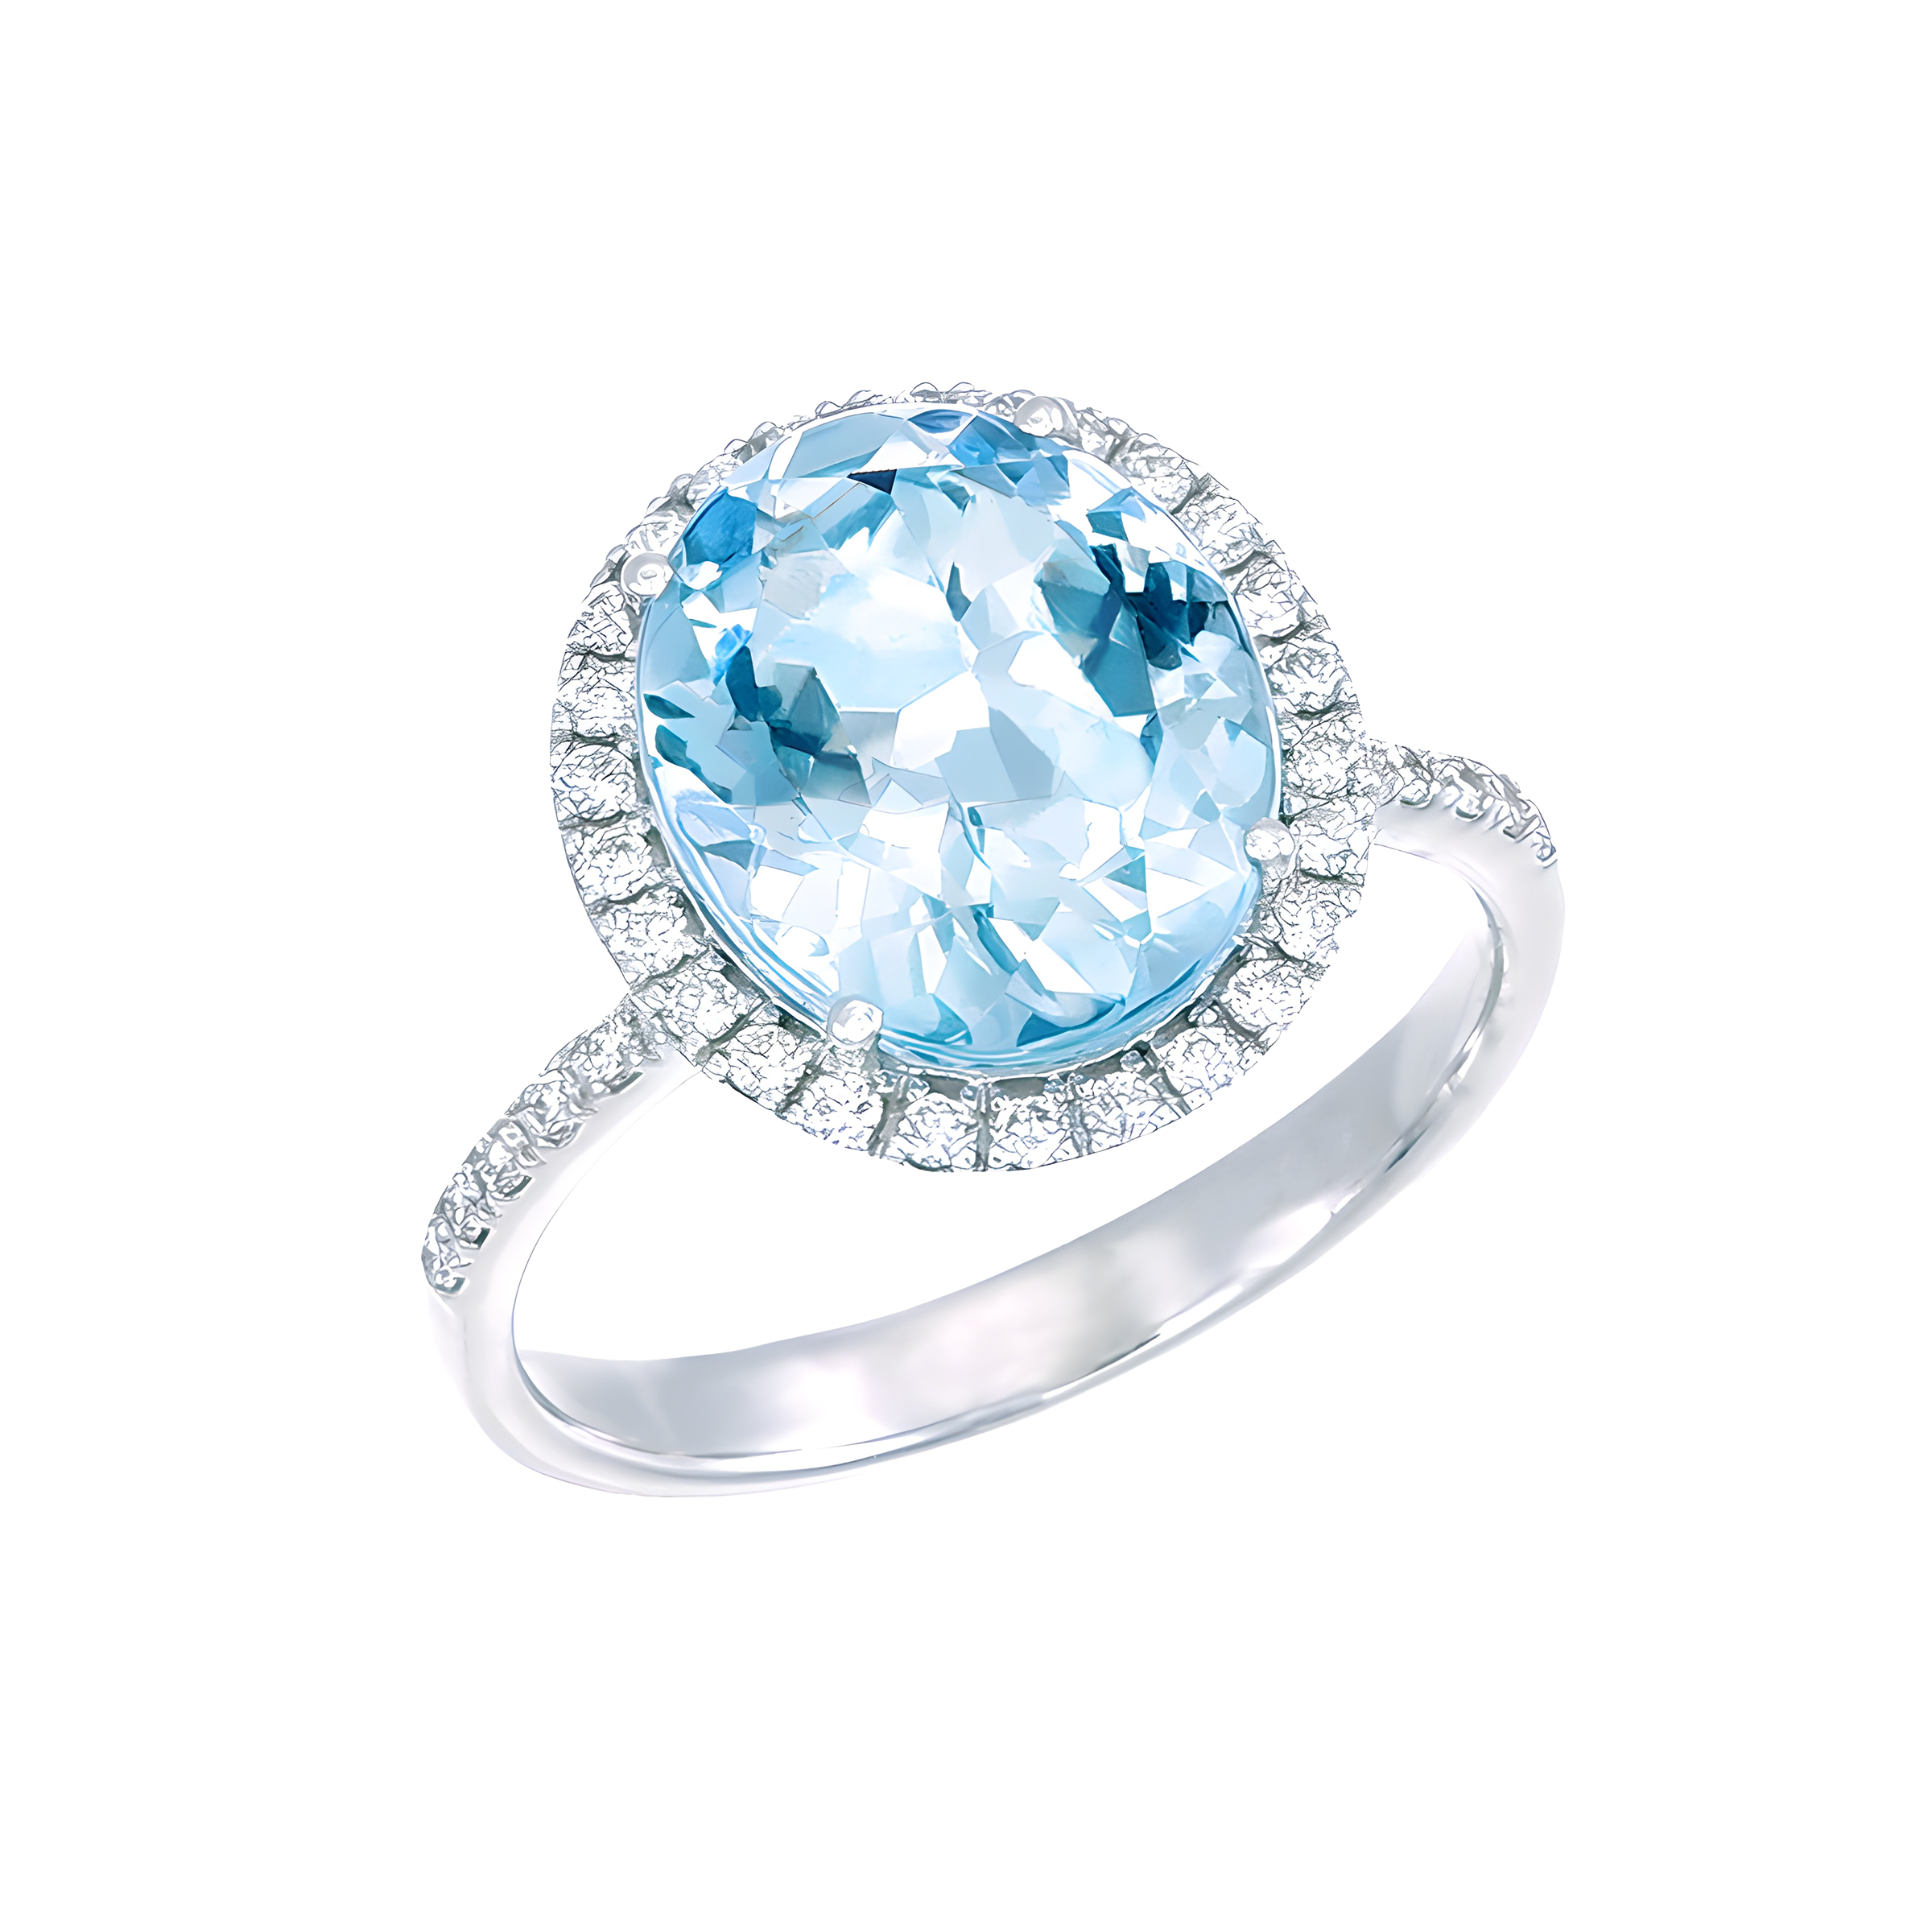 Oval Aquamarine and Diamond Halo Ring in 18k White Gold